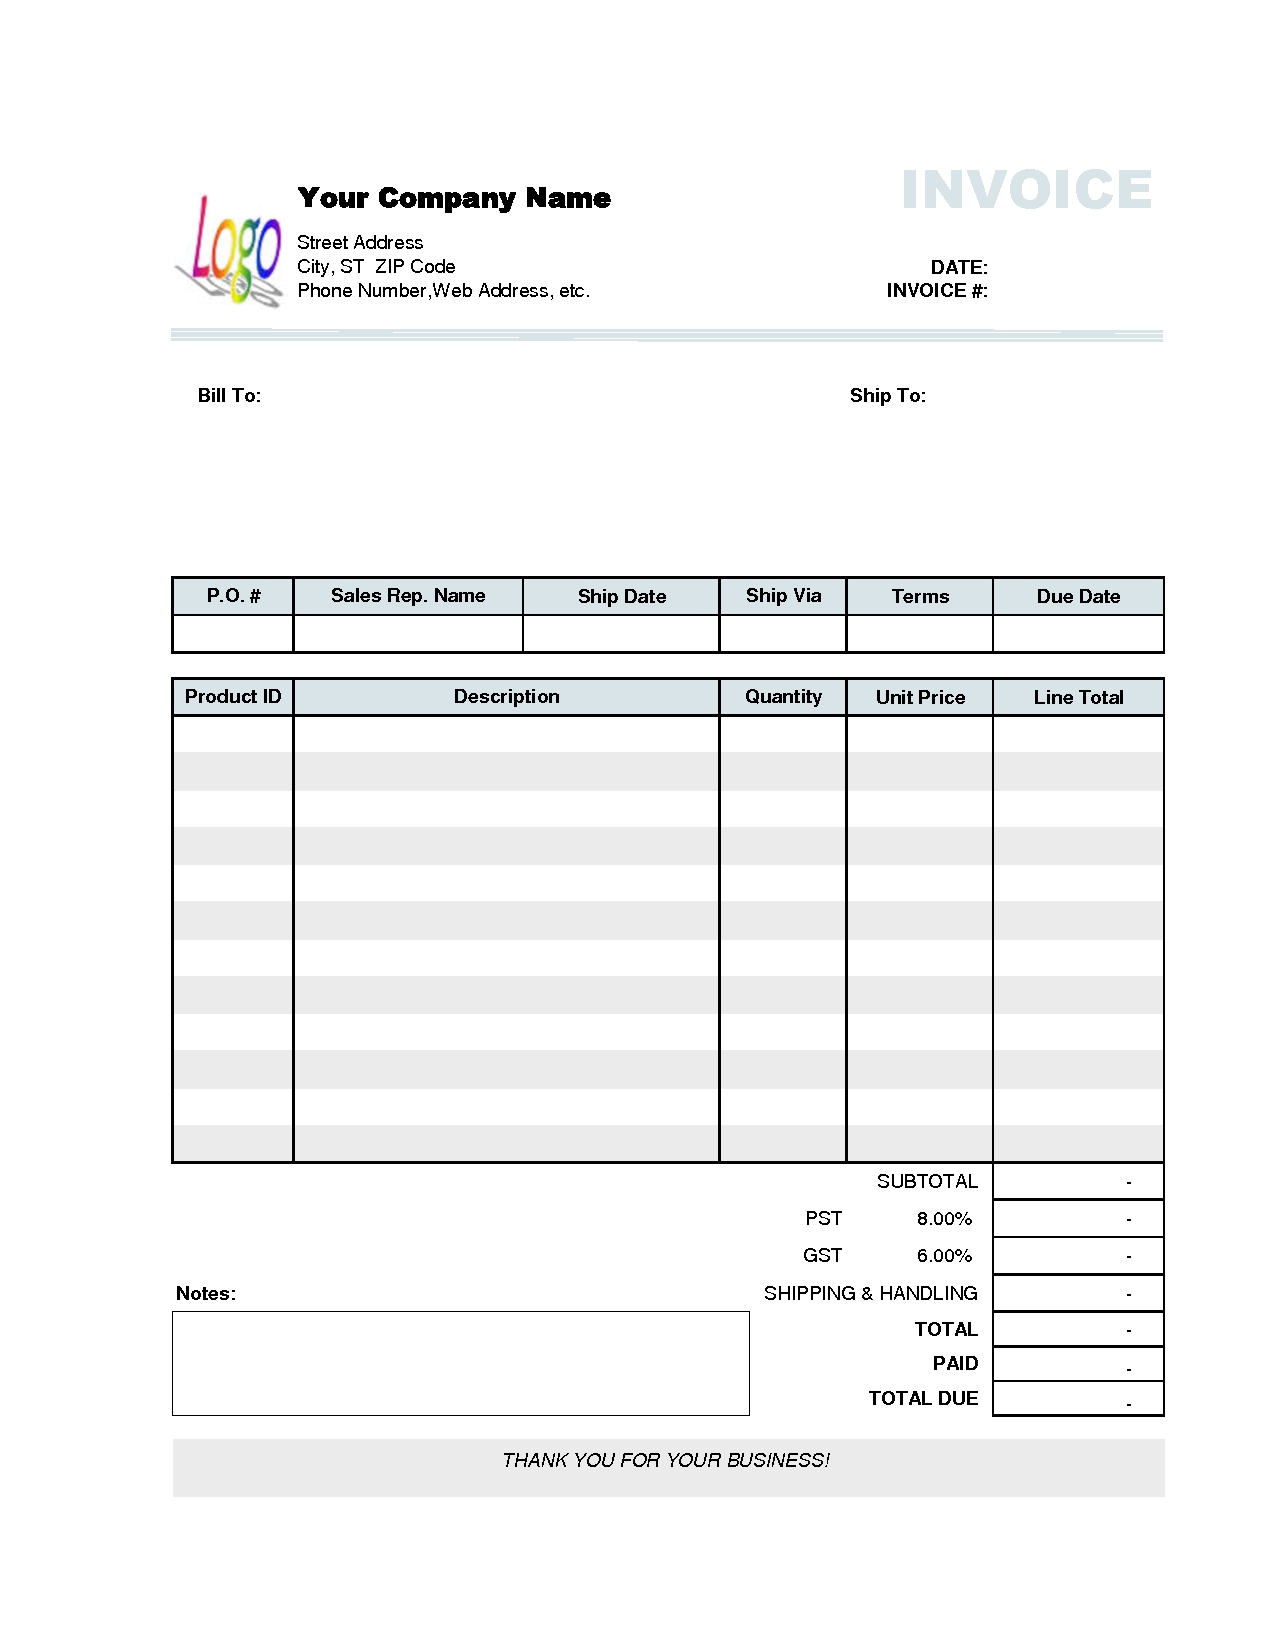 basic invoice format invoice sample template invoice sample template sponsorship 1275 X 1650